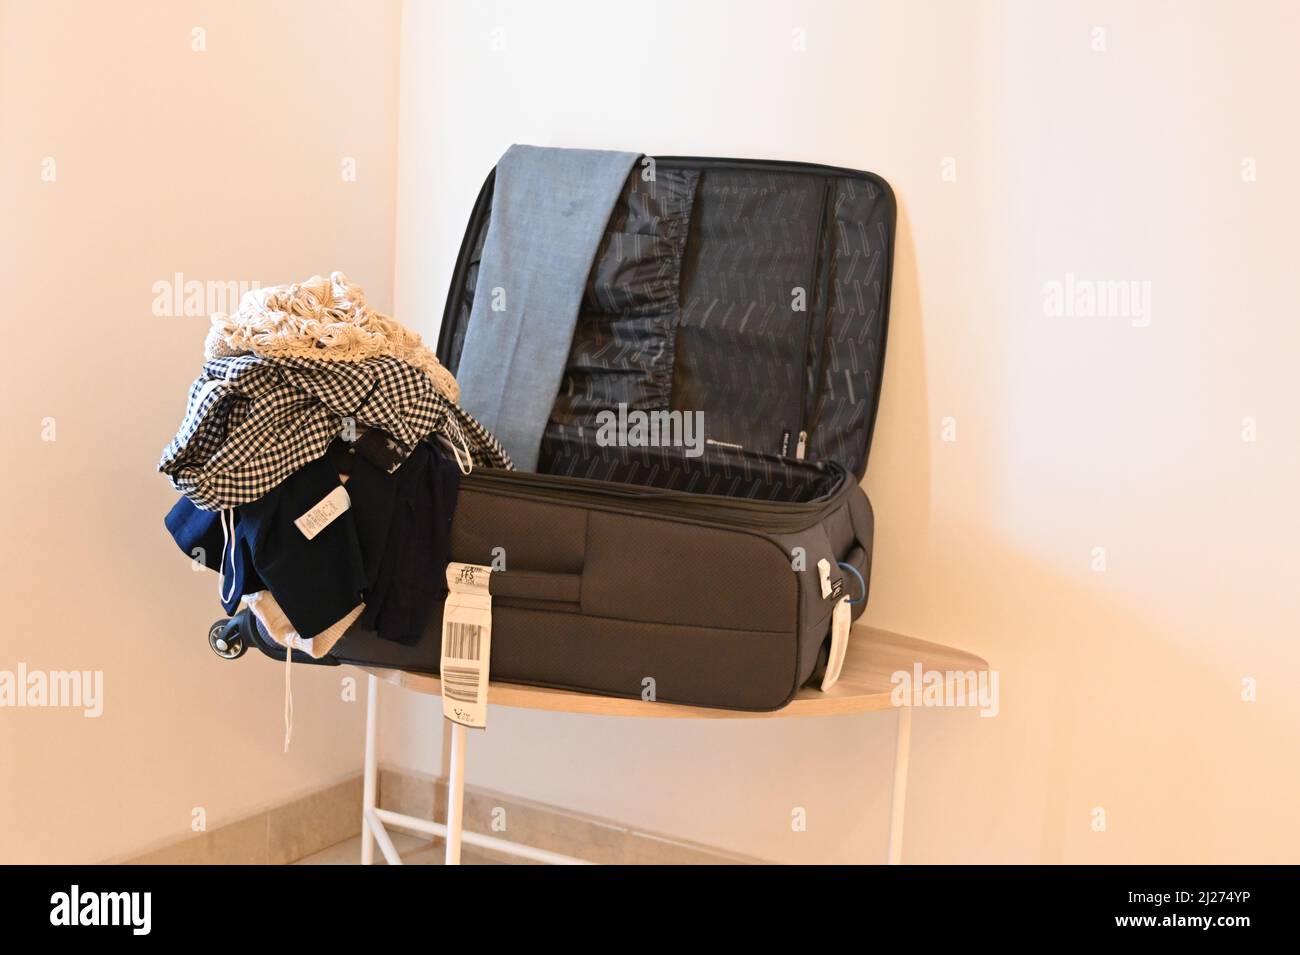 An open suitcase in a hotel suite sitting on a table, open, with clothes piled up on the side. Stock Photo